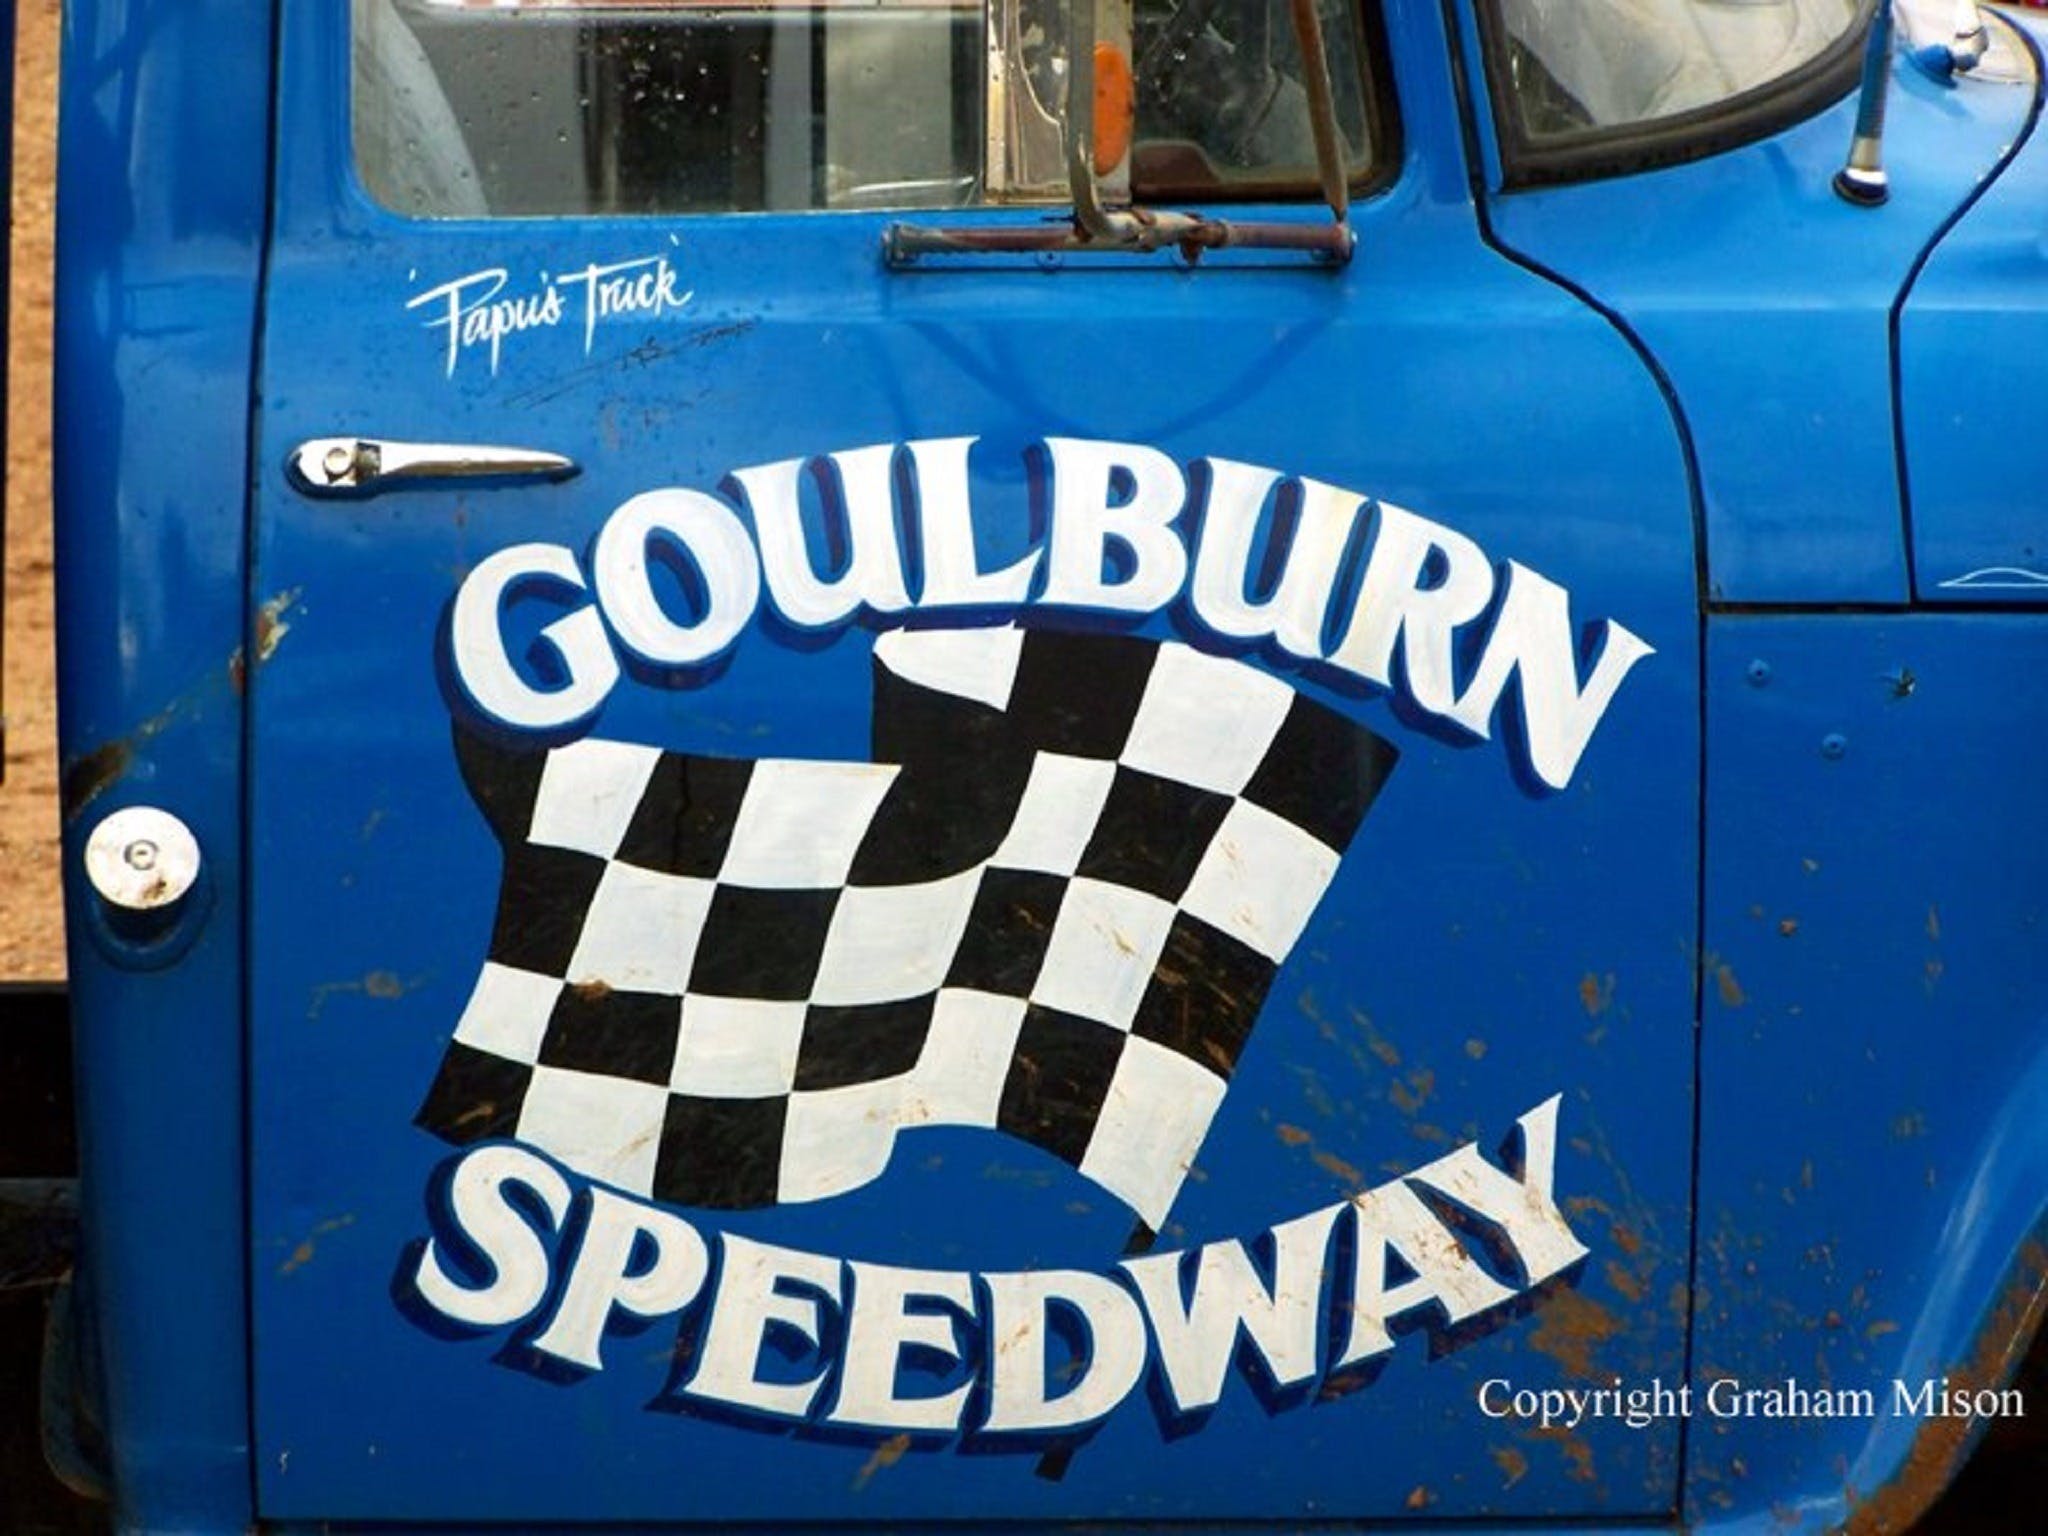 50 years of racing at Goulburn Speedway - Accommodation Cooktown